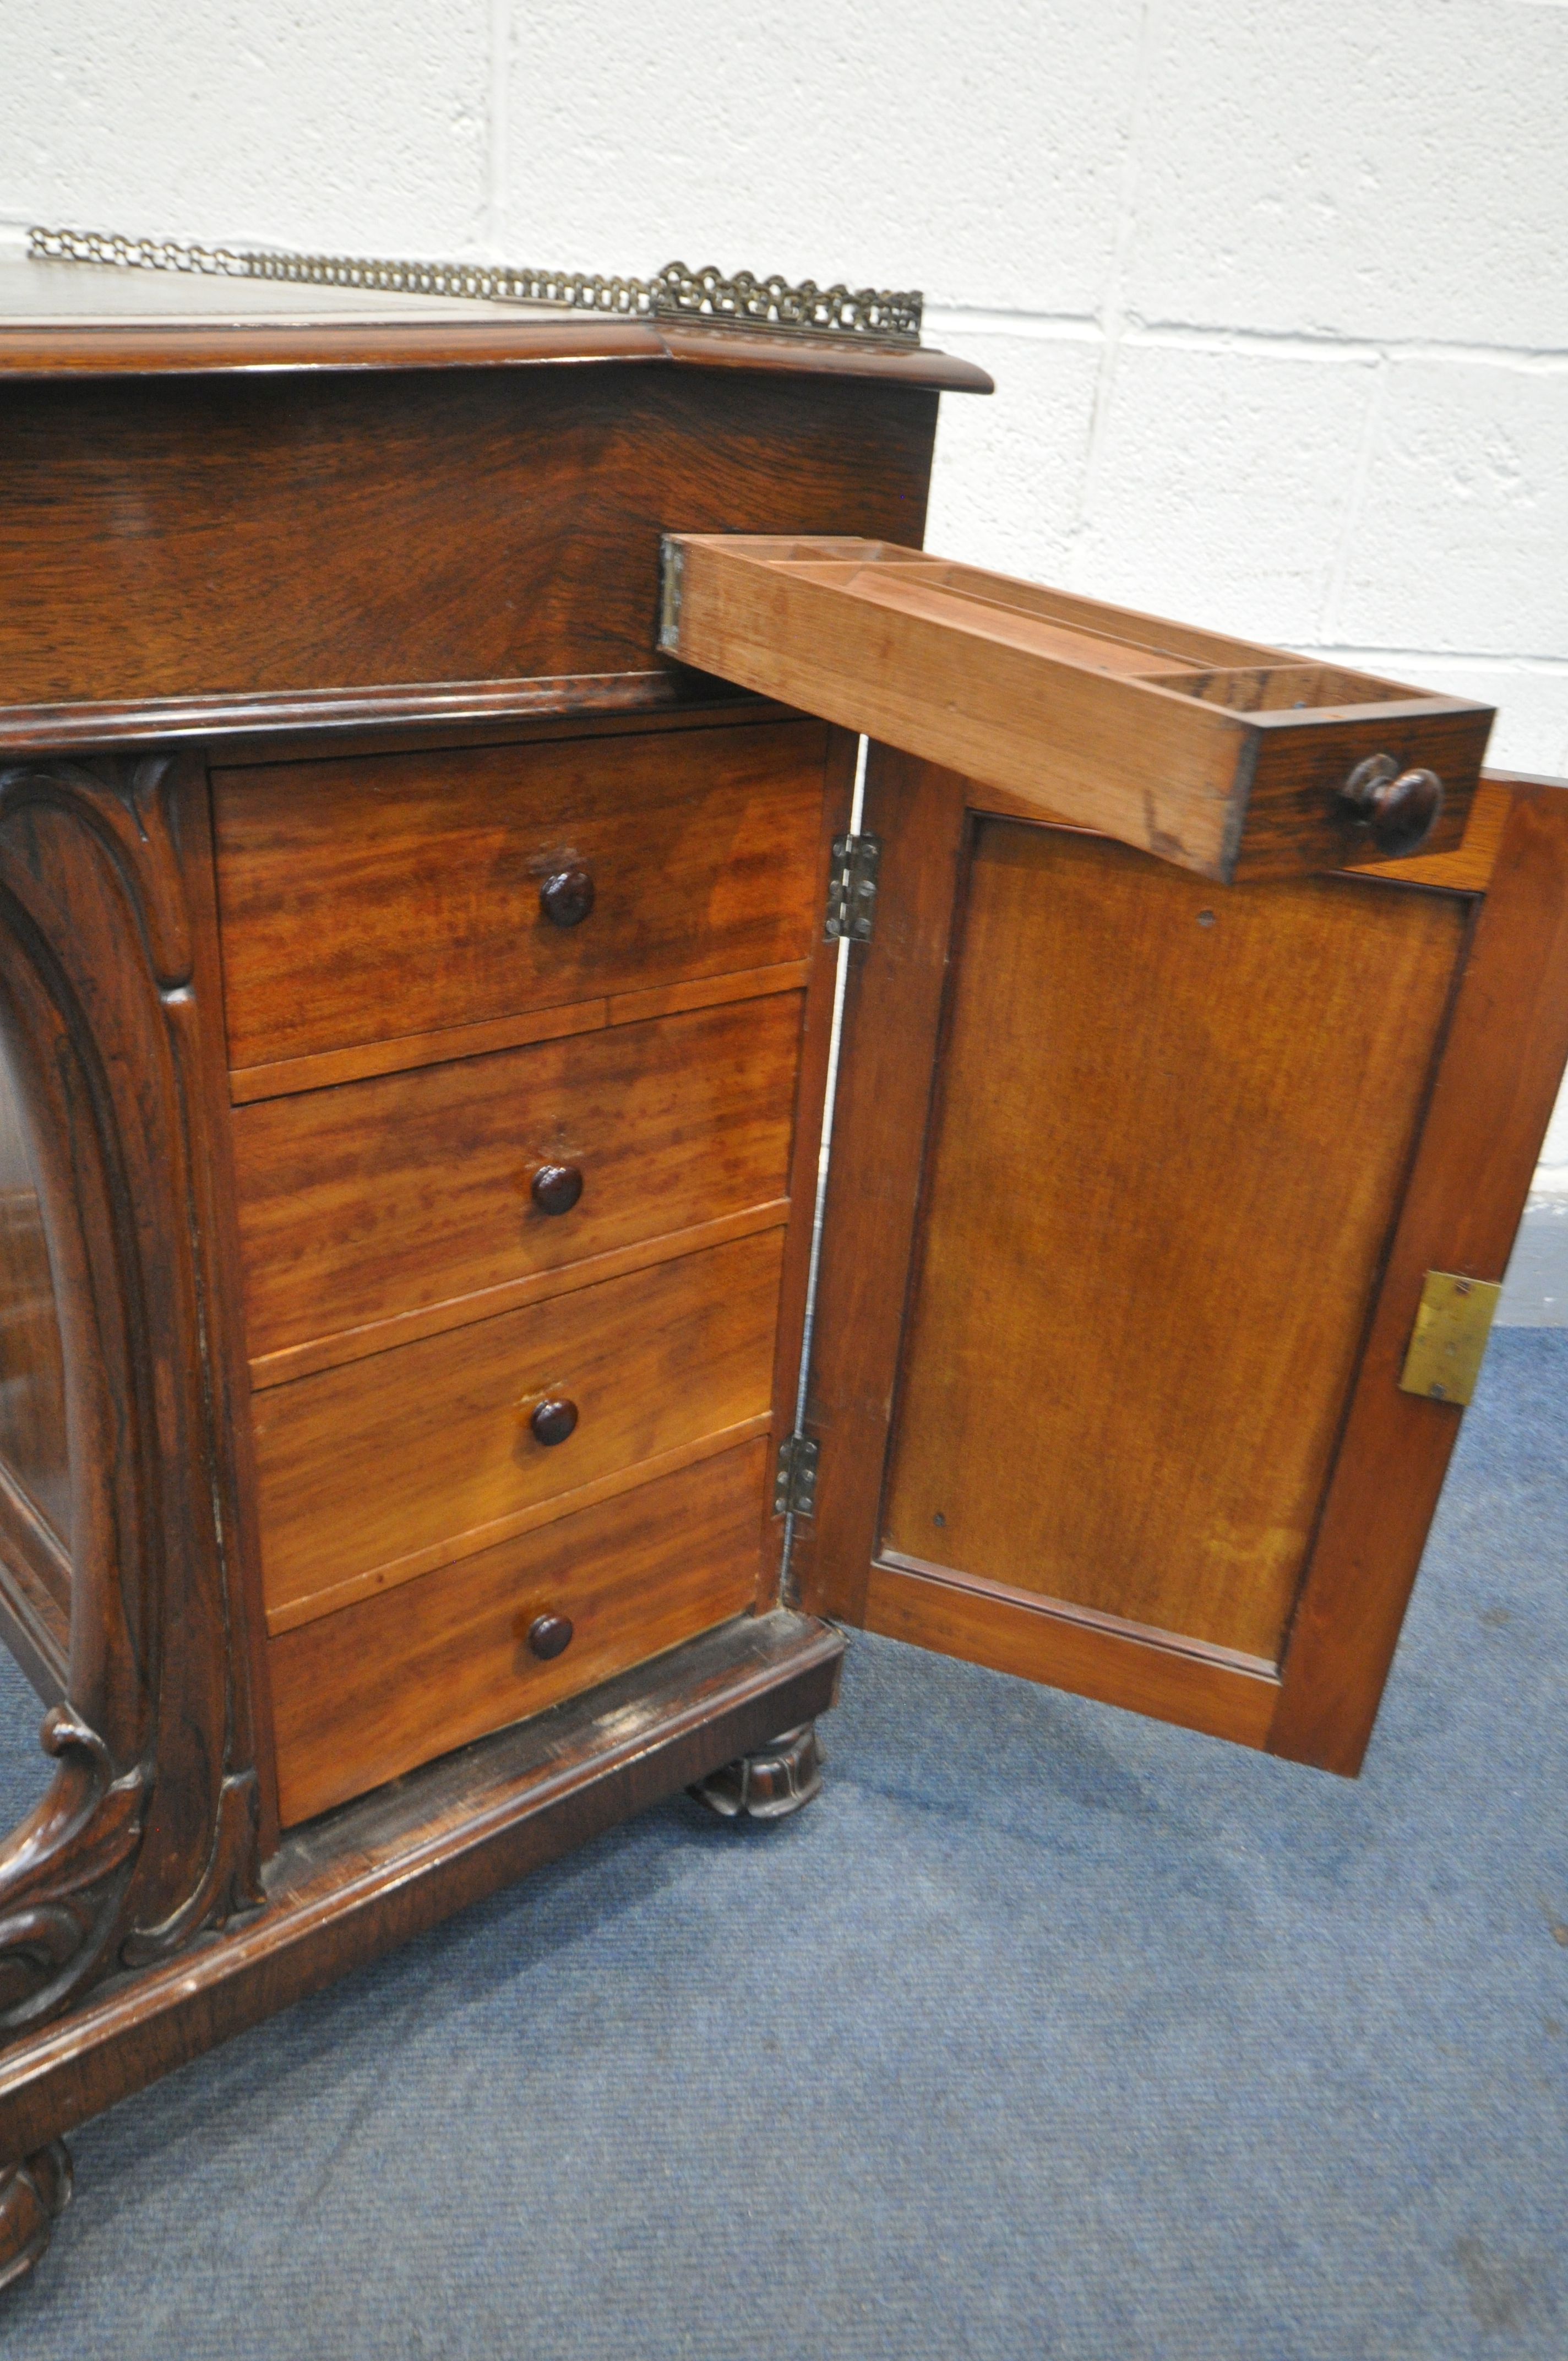 AN EARLY 19TH CENTURY ROSEWOOD DAVENPORT DESK, having a brass open fretwork gallery behind a leather - Image 7 of 9